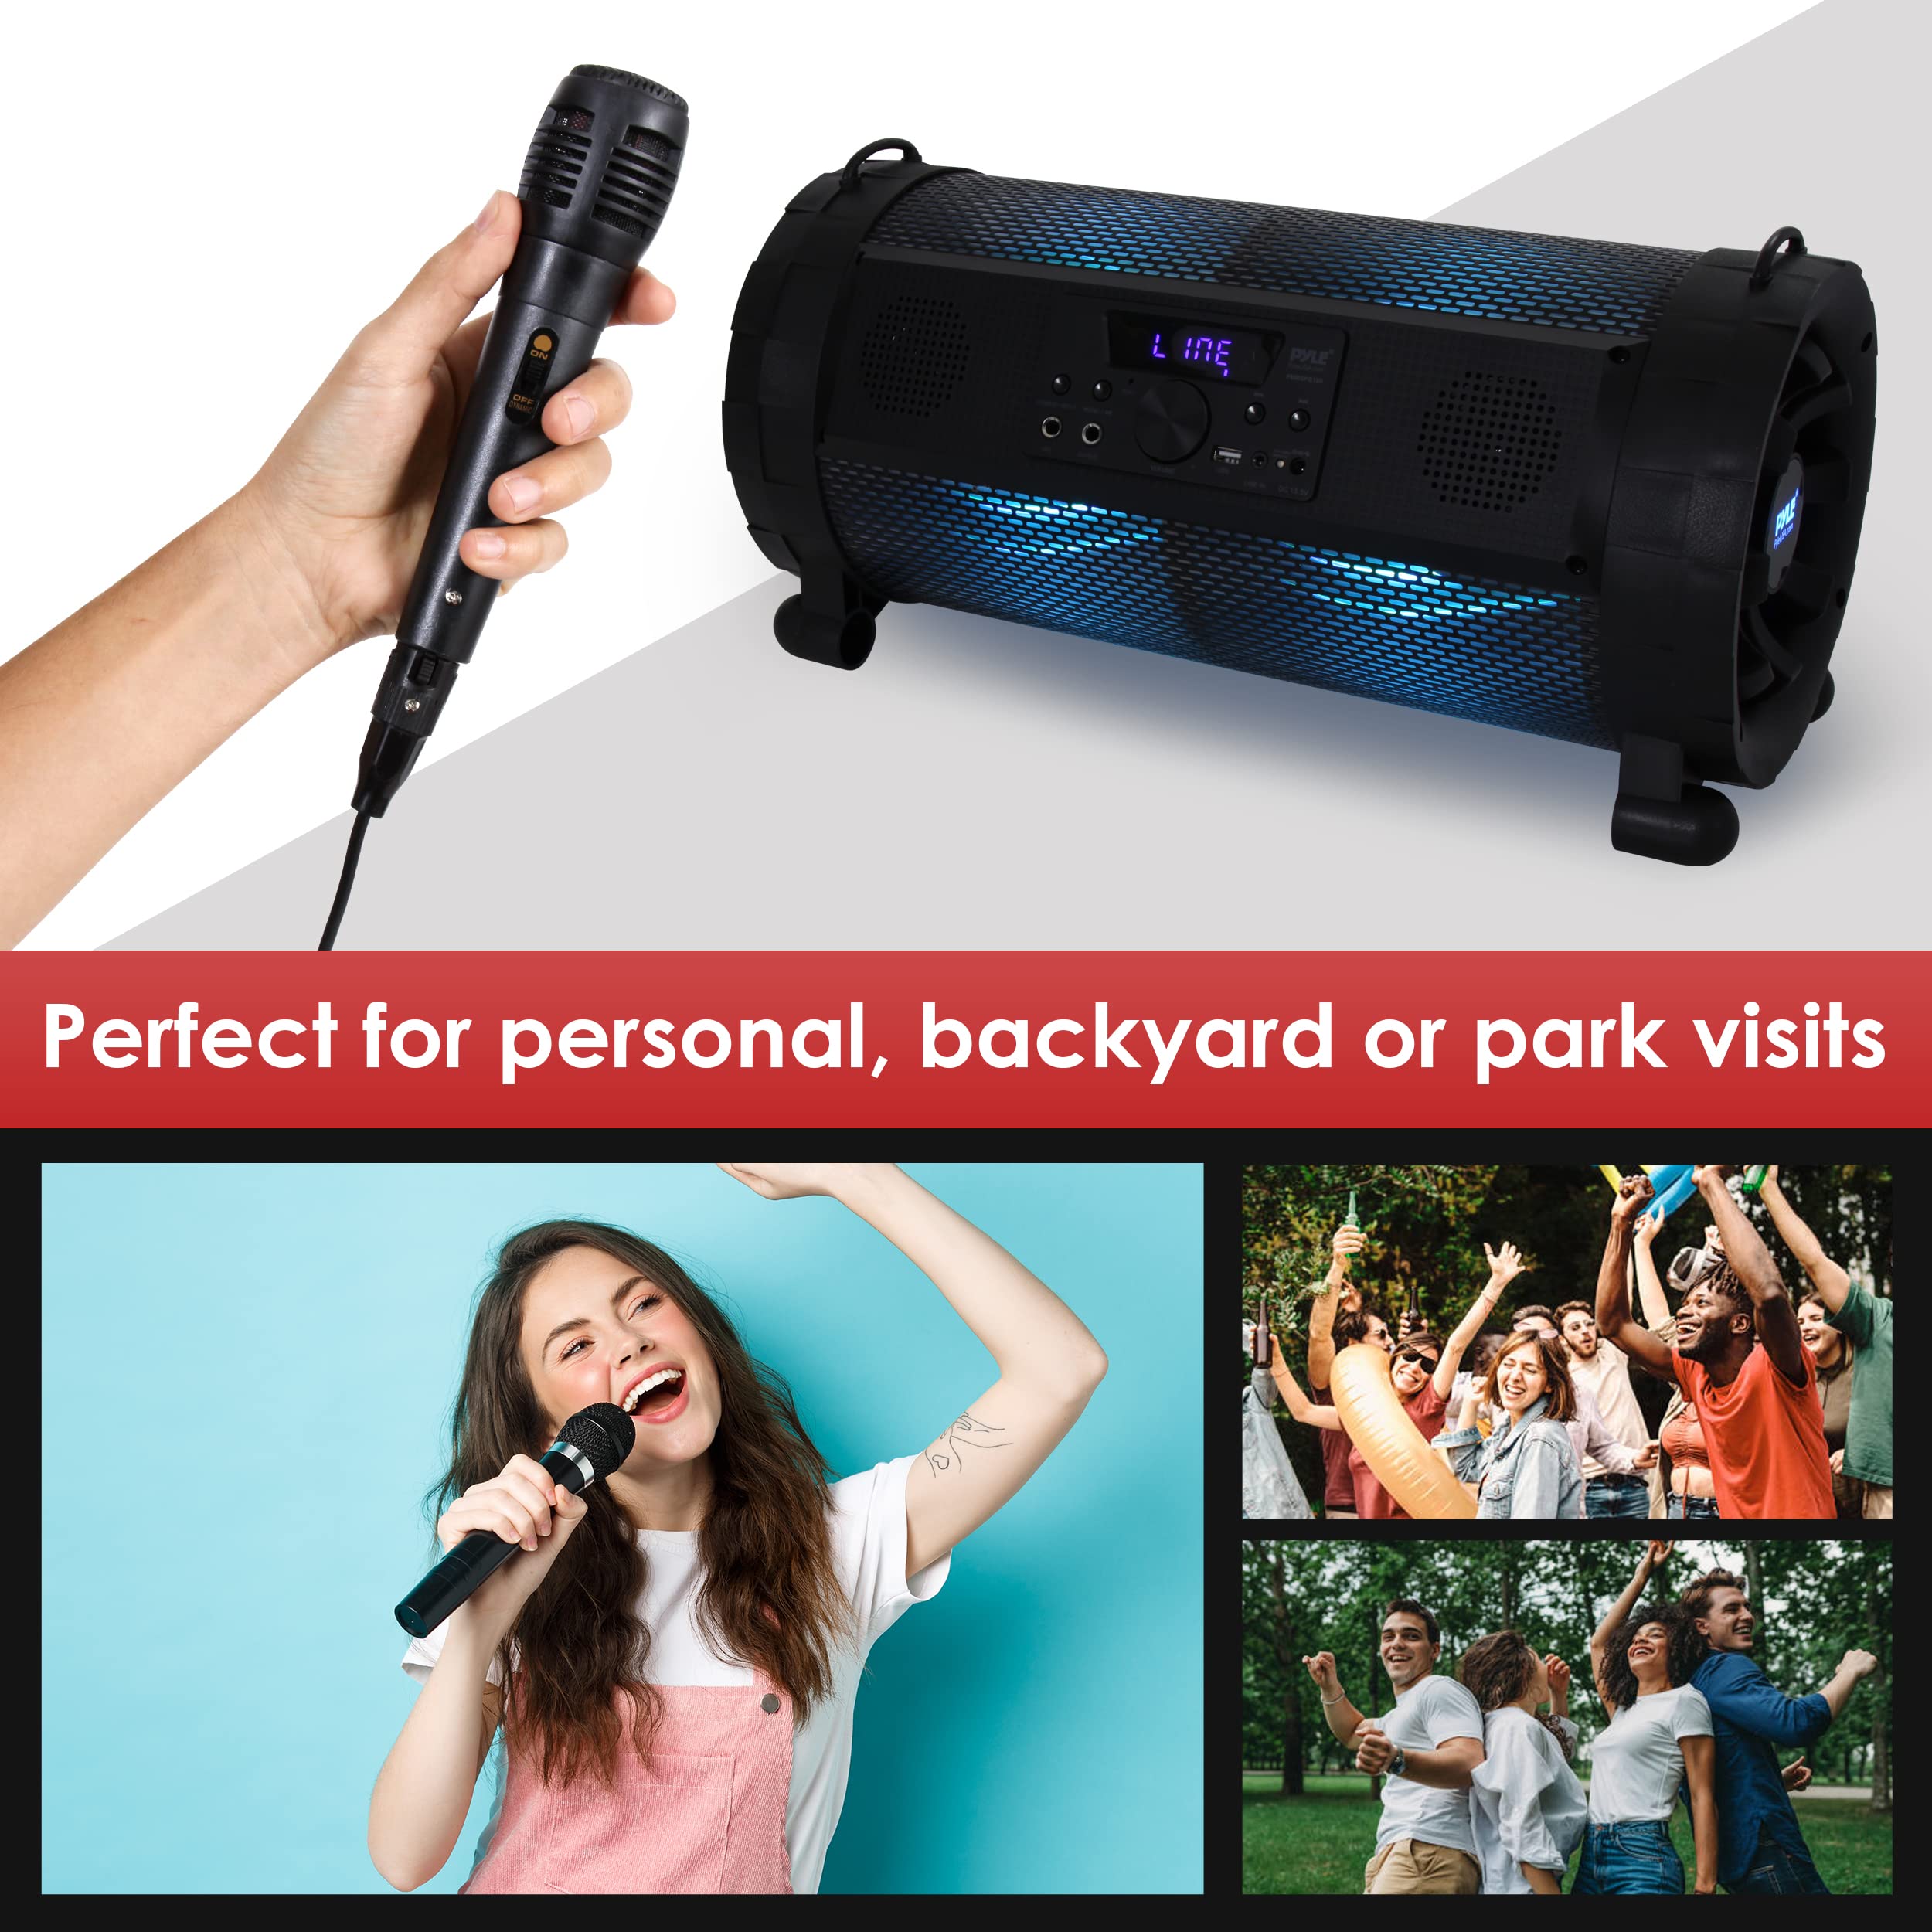 Pyle Bluetooth Boombox Street Blaster Stereo Speaker - Portable Wireless Power FM Radio / MP3 System w/ Remote, LED Lights & Rechargeable Battery - PBMSPG190 , Black